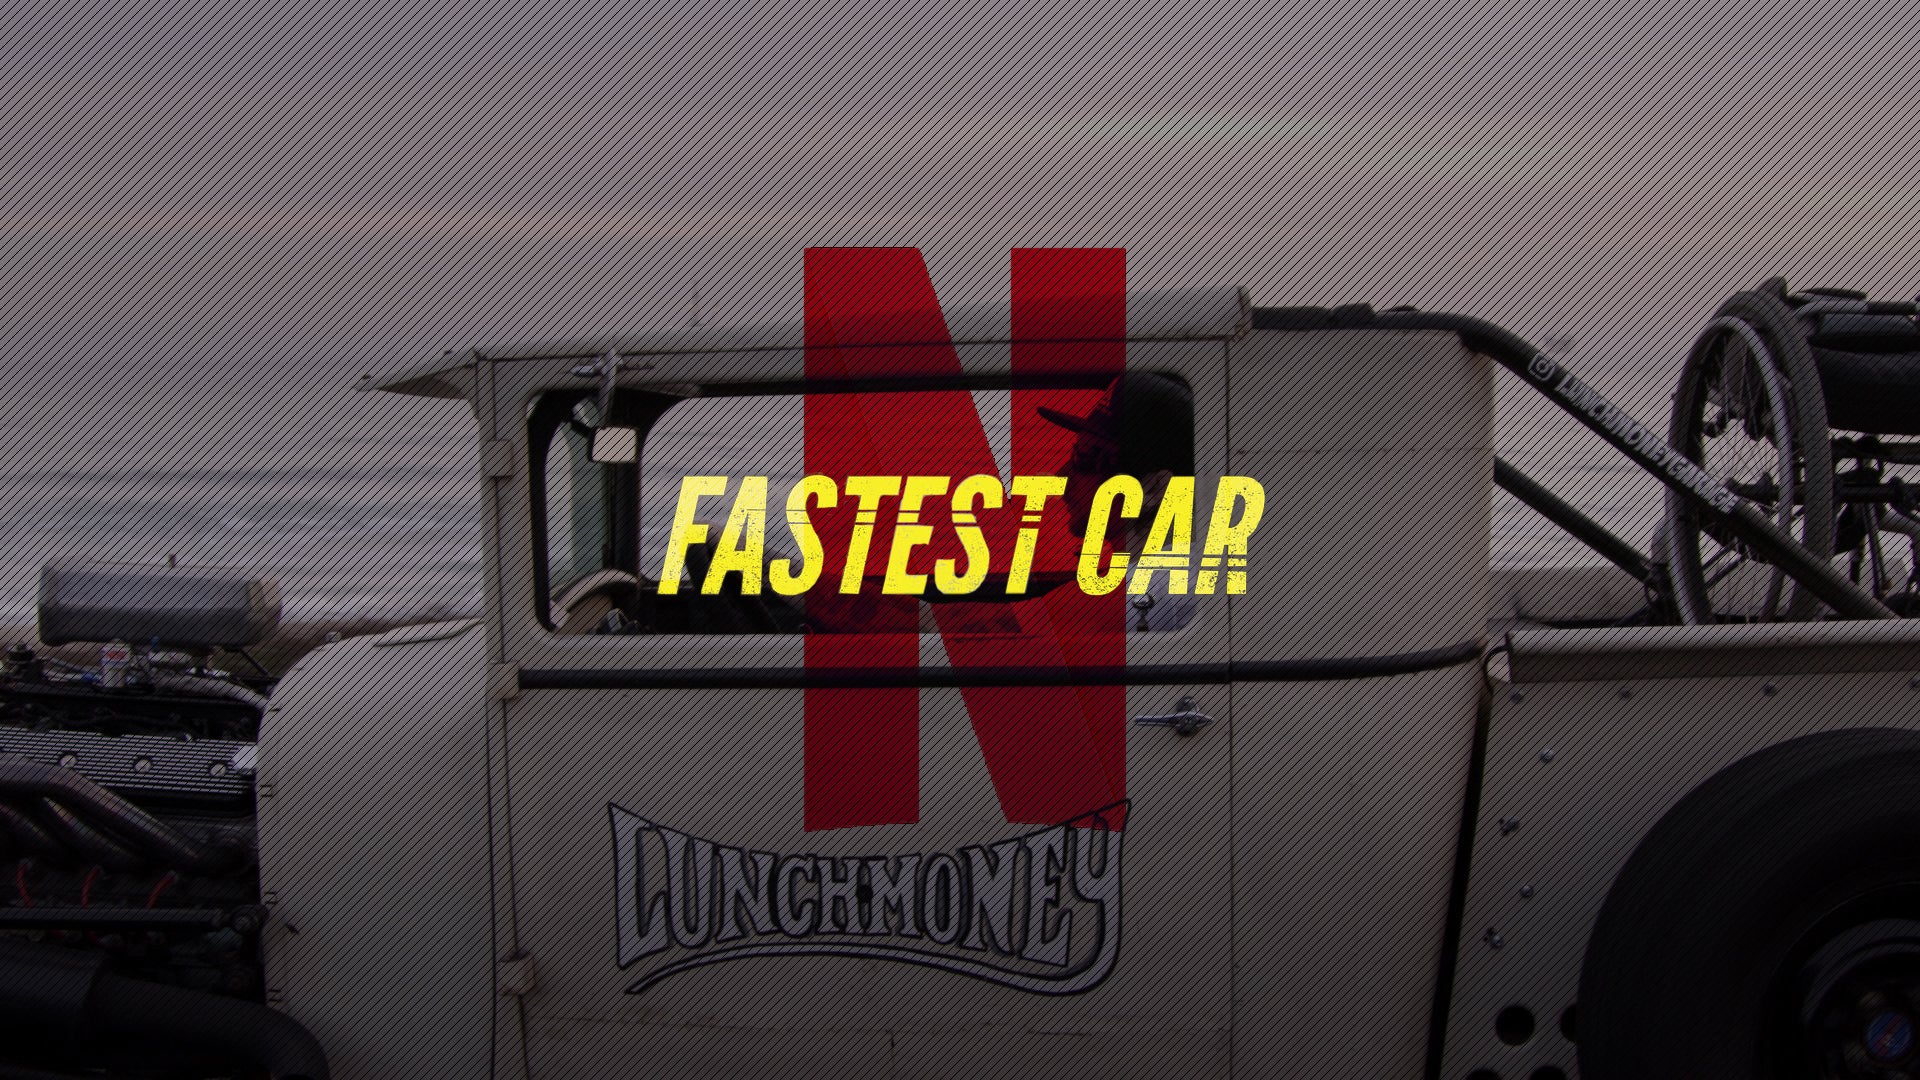 Here’s a Look at Our Netflix’s <em>Fastest Car</em> March Madness Brackets